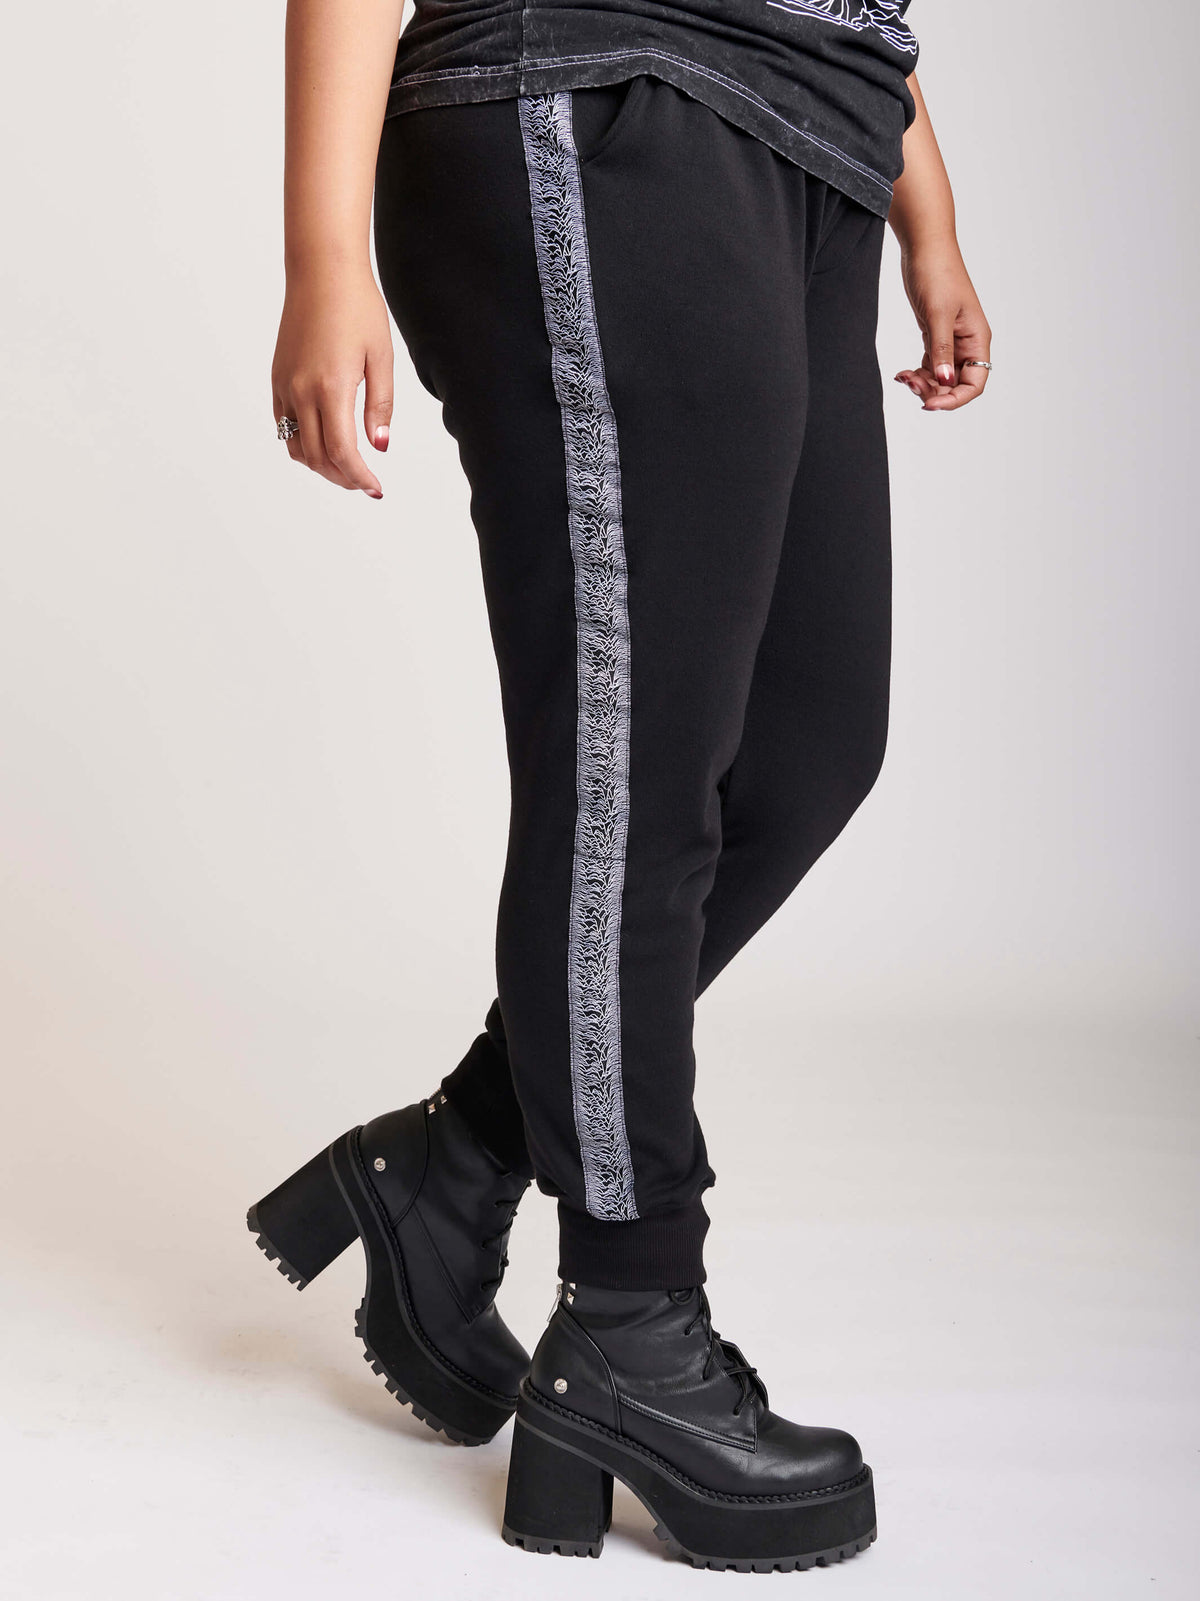 BLACK JOGGER WITH CUSTOM SIDE TAPE DETAIL